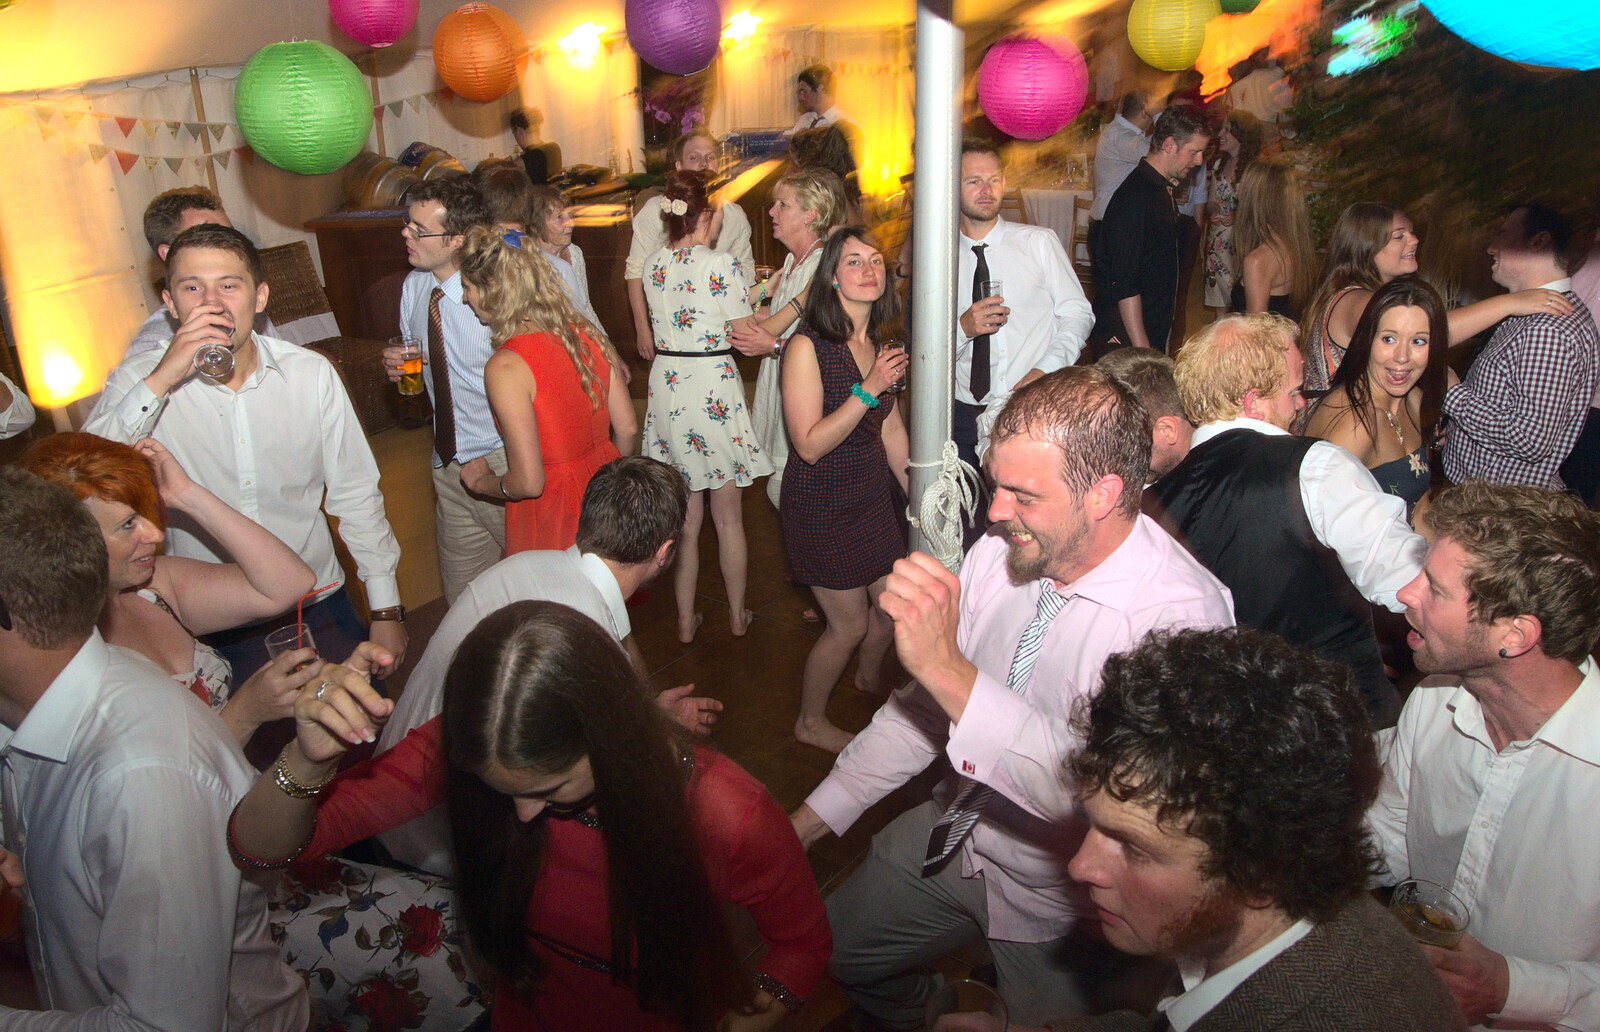 More mosh-pit action from The BBs Play Steph's Wedding, Burston, Norfolk - 13th July 2013